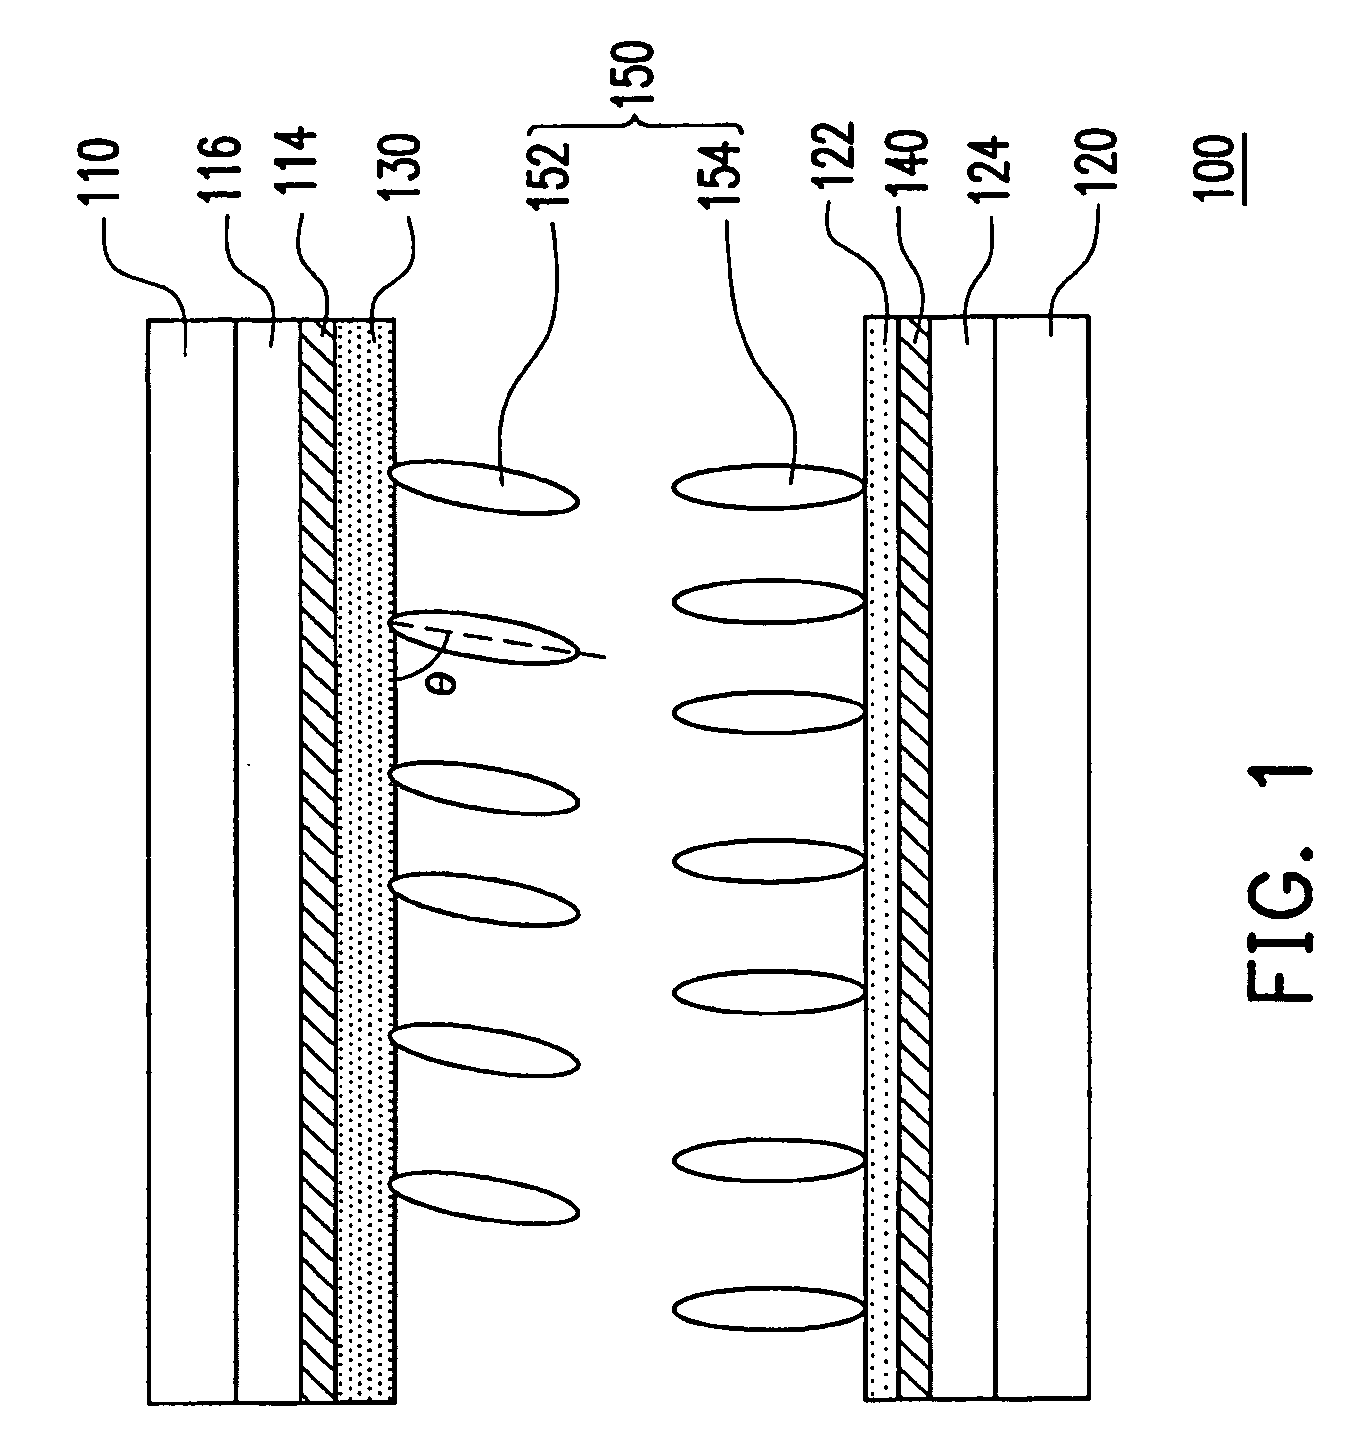 Liquid crystal display panel, electronic apparatus, and manufacturing method thereof